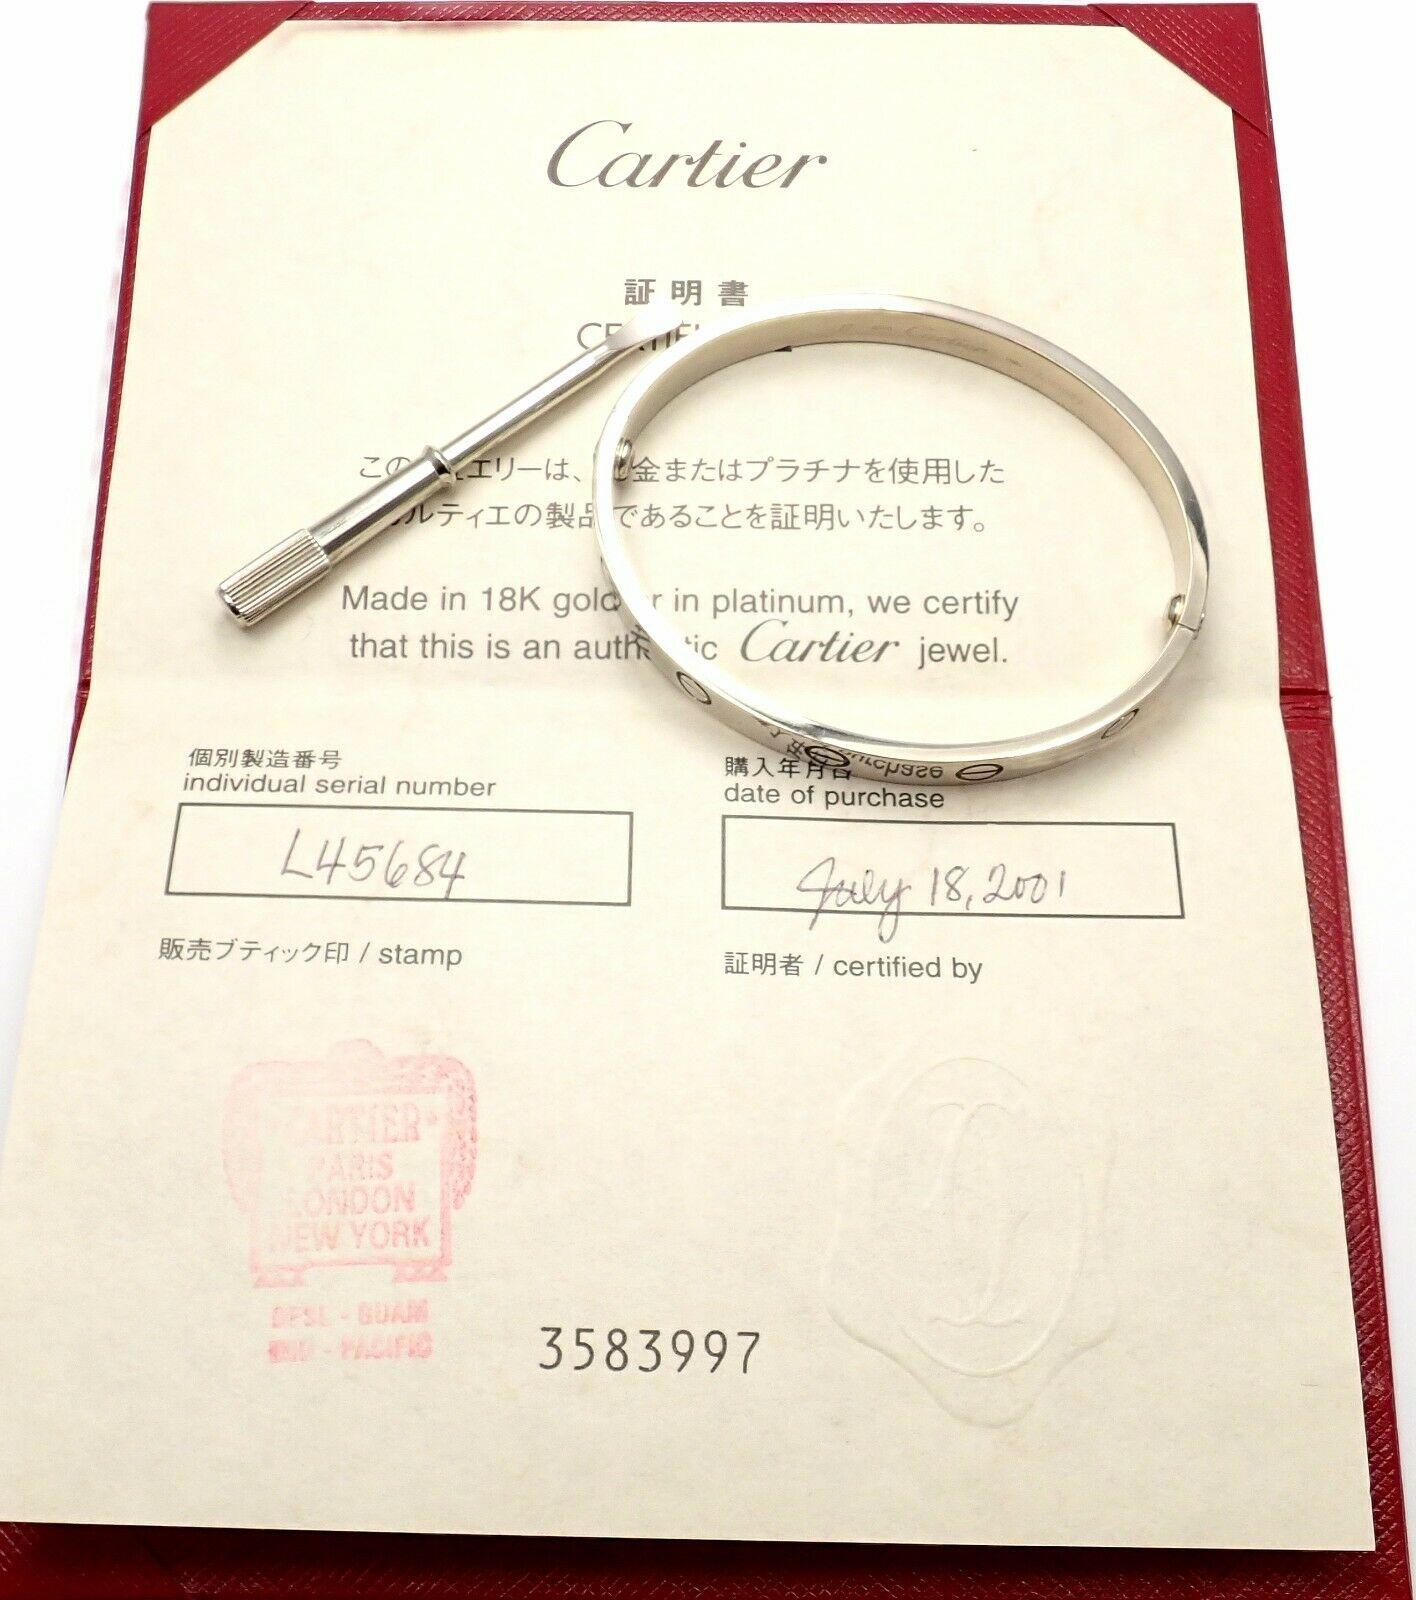 18k White Gold Love Bangle Bracelet by Cartier. Size 17. 
This bracelet comes with Cartier certificate, Cartier box and Cartier screwdriver.
Details: Size: 17 
Weight: 34.6 grams
Width: 6.5mm 
Hallmarks: Cartier 750 17 1993 L45684
*Free Shipping